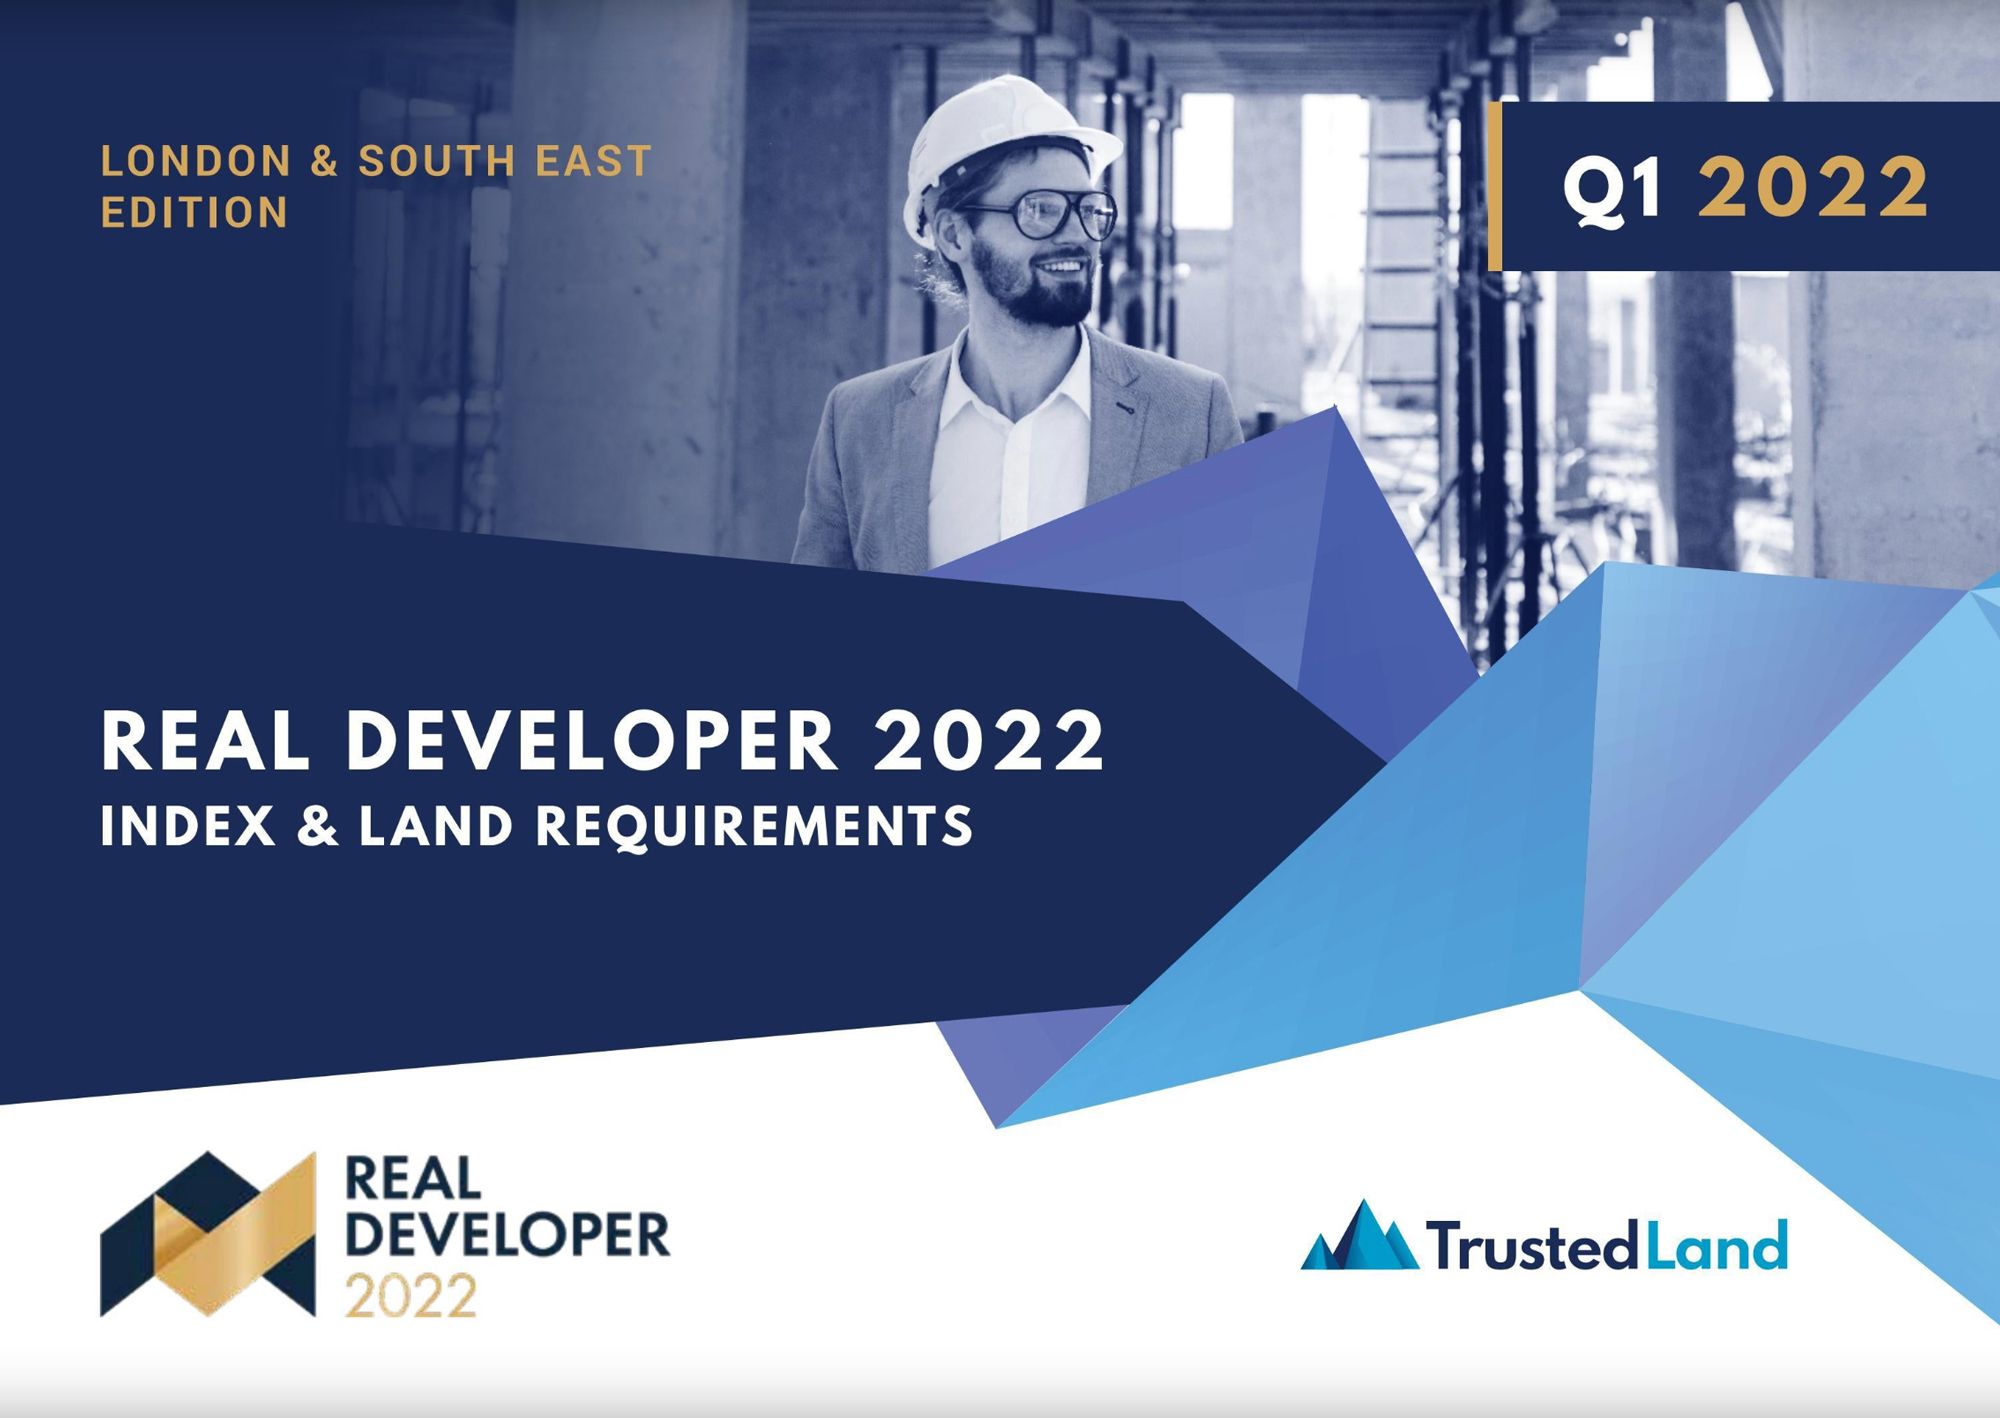 Real Developer 2022 Index - land requirements